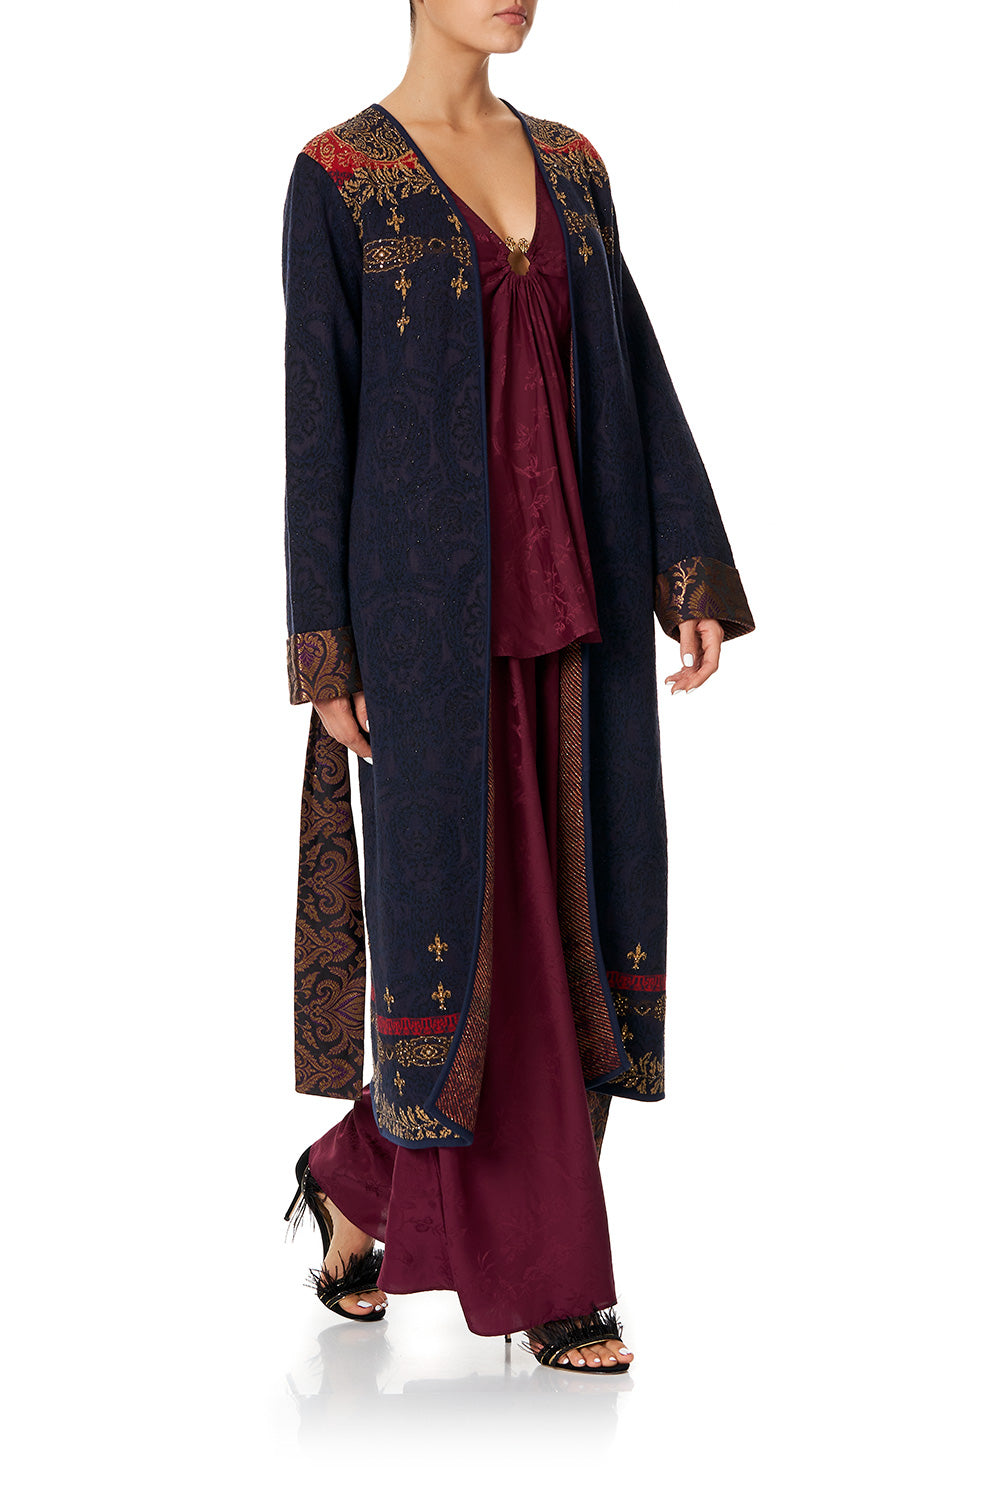 KNIT COAT WITH WOVEN DETAIL THIS CHARMING WOMAN